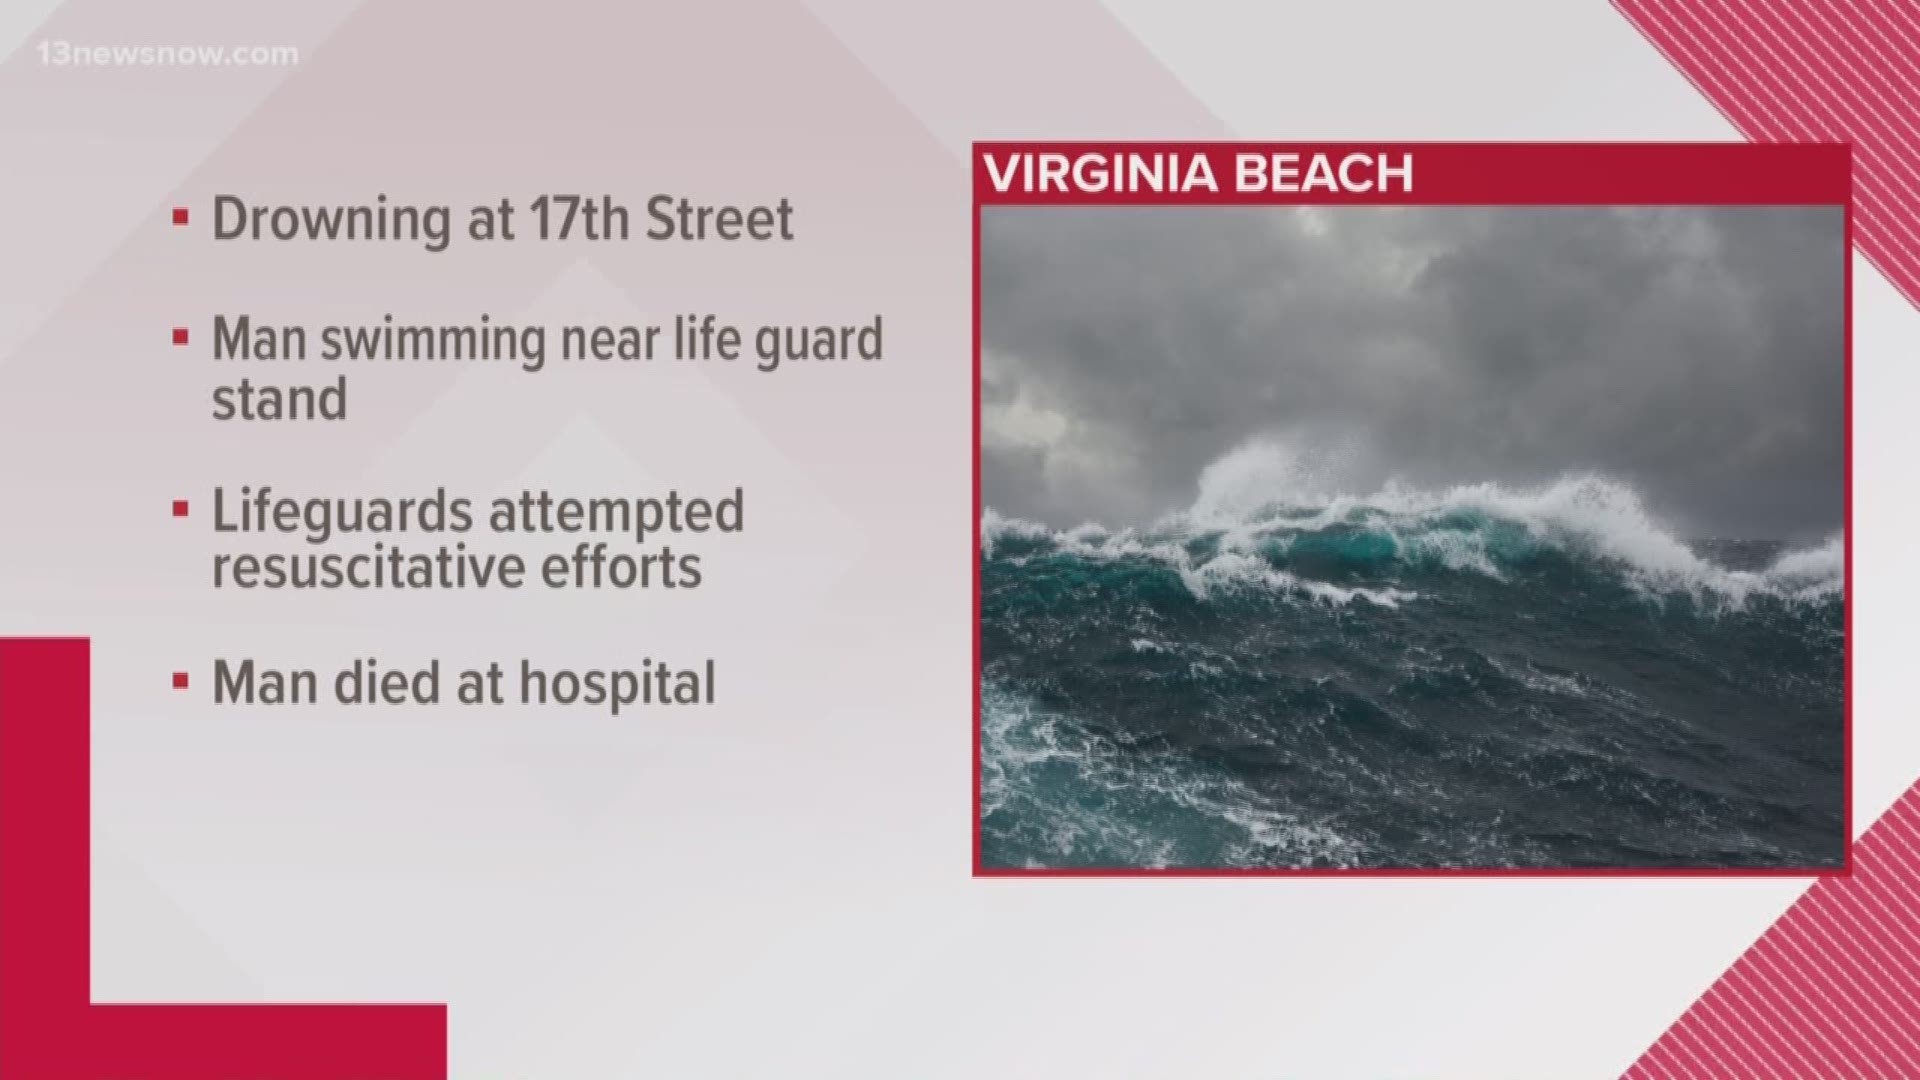 Virginia Beach said red flags were flying when lifeguards saw the man start to struggle.